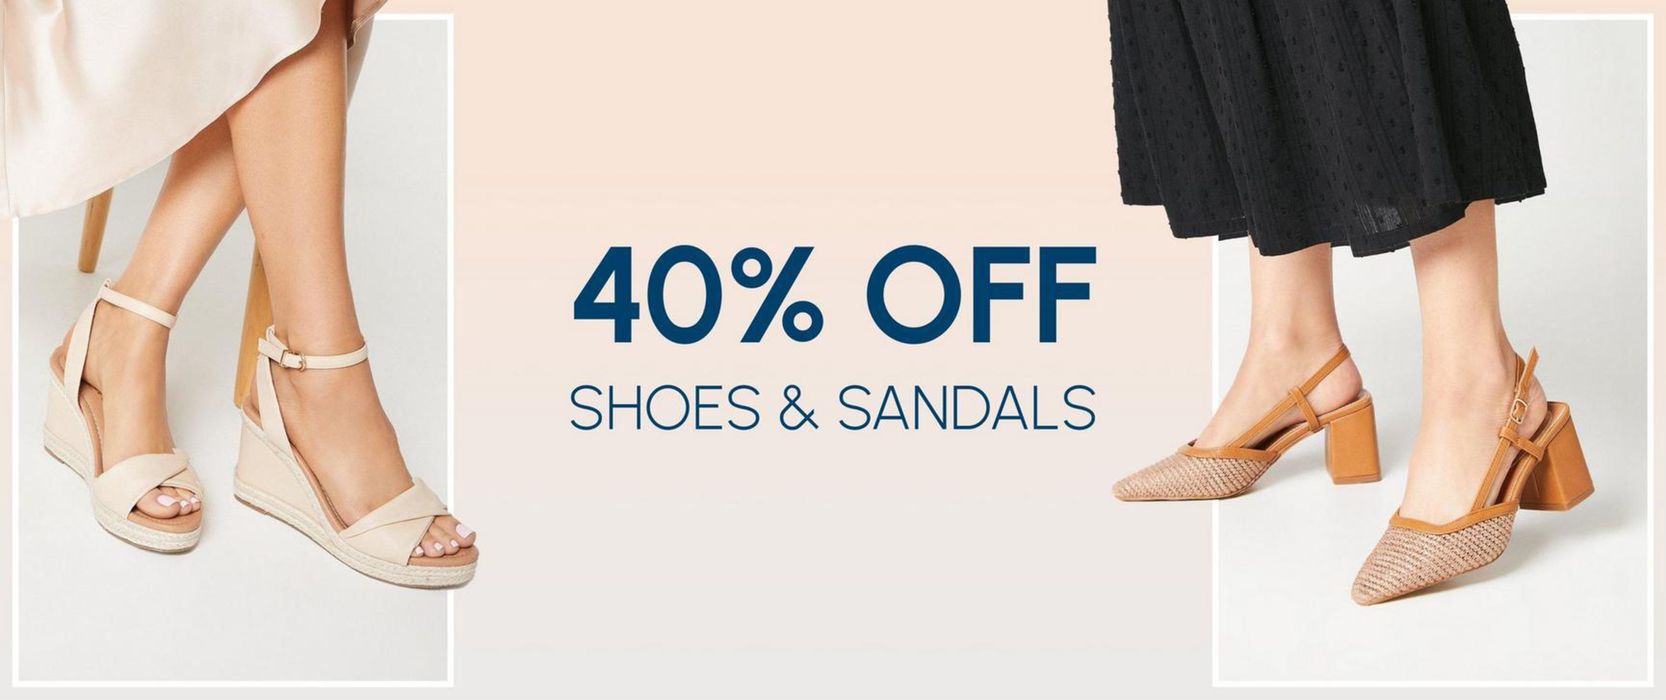 Wallis catalogue in Mansfield | Up To 50% Off Spring Outfits | 10/05/2024 - 23/05/2024